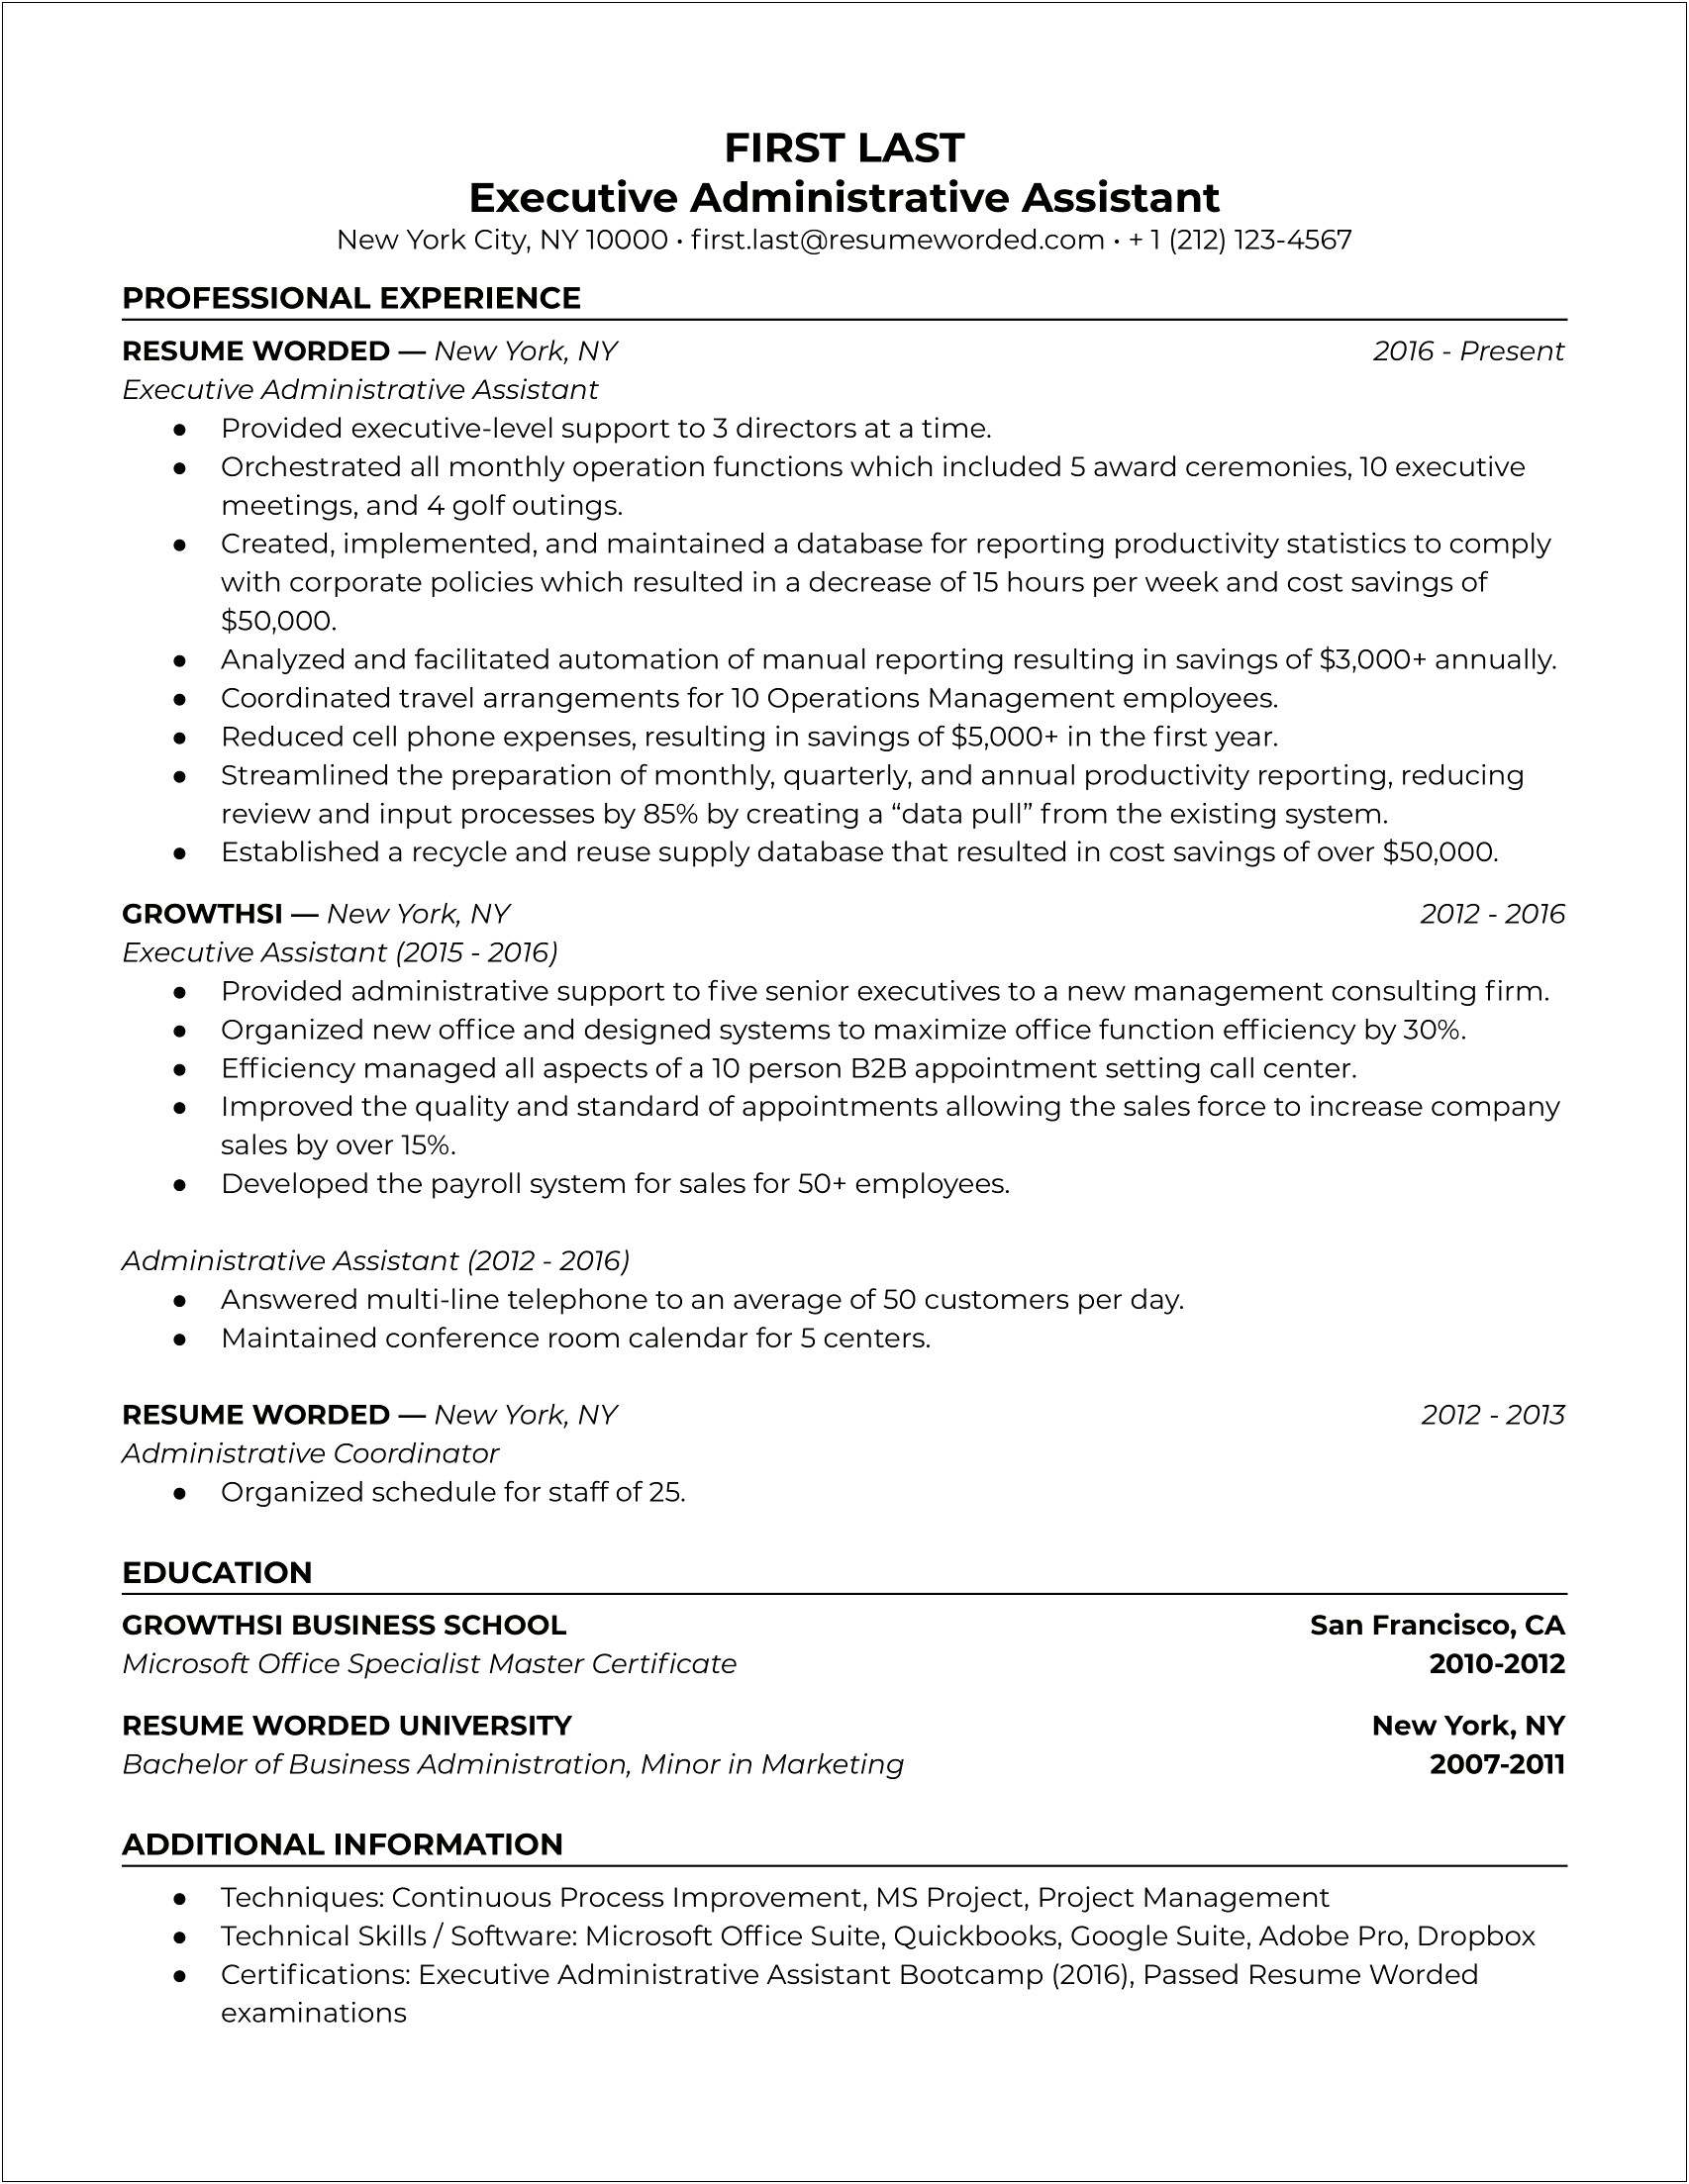 Administrative Assistant Skill Based Resume Categories